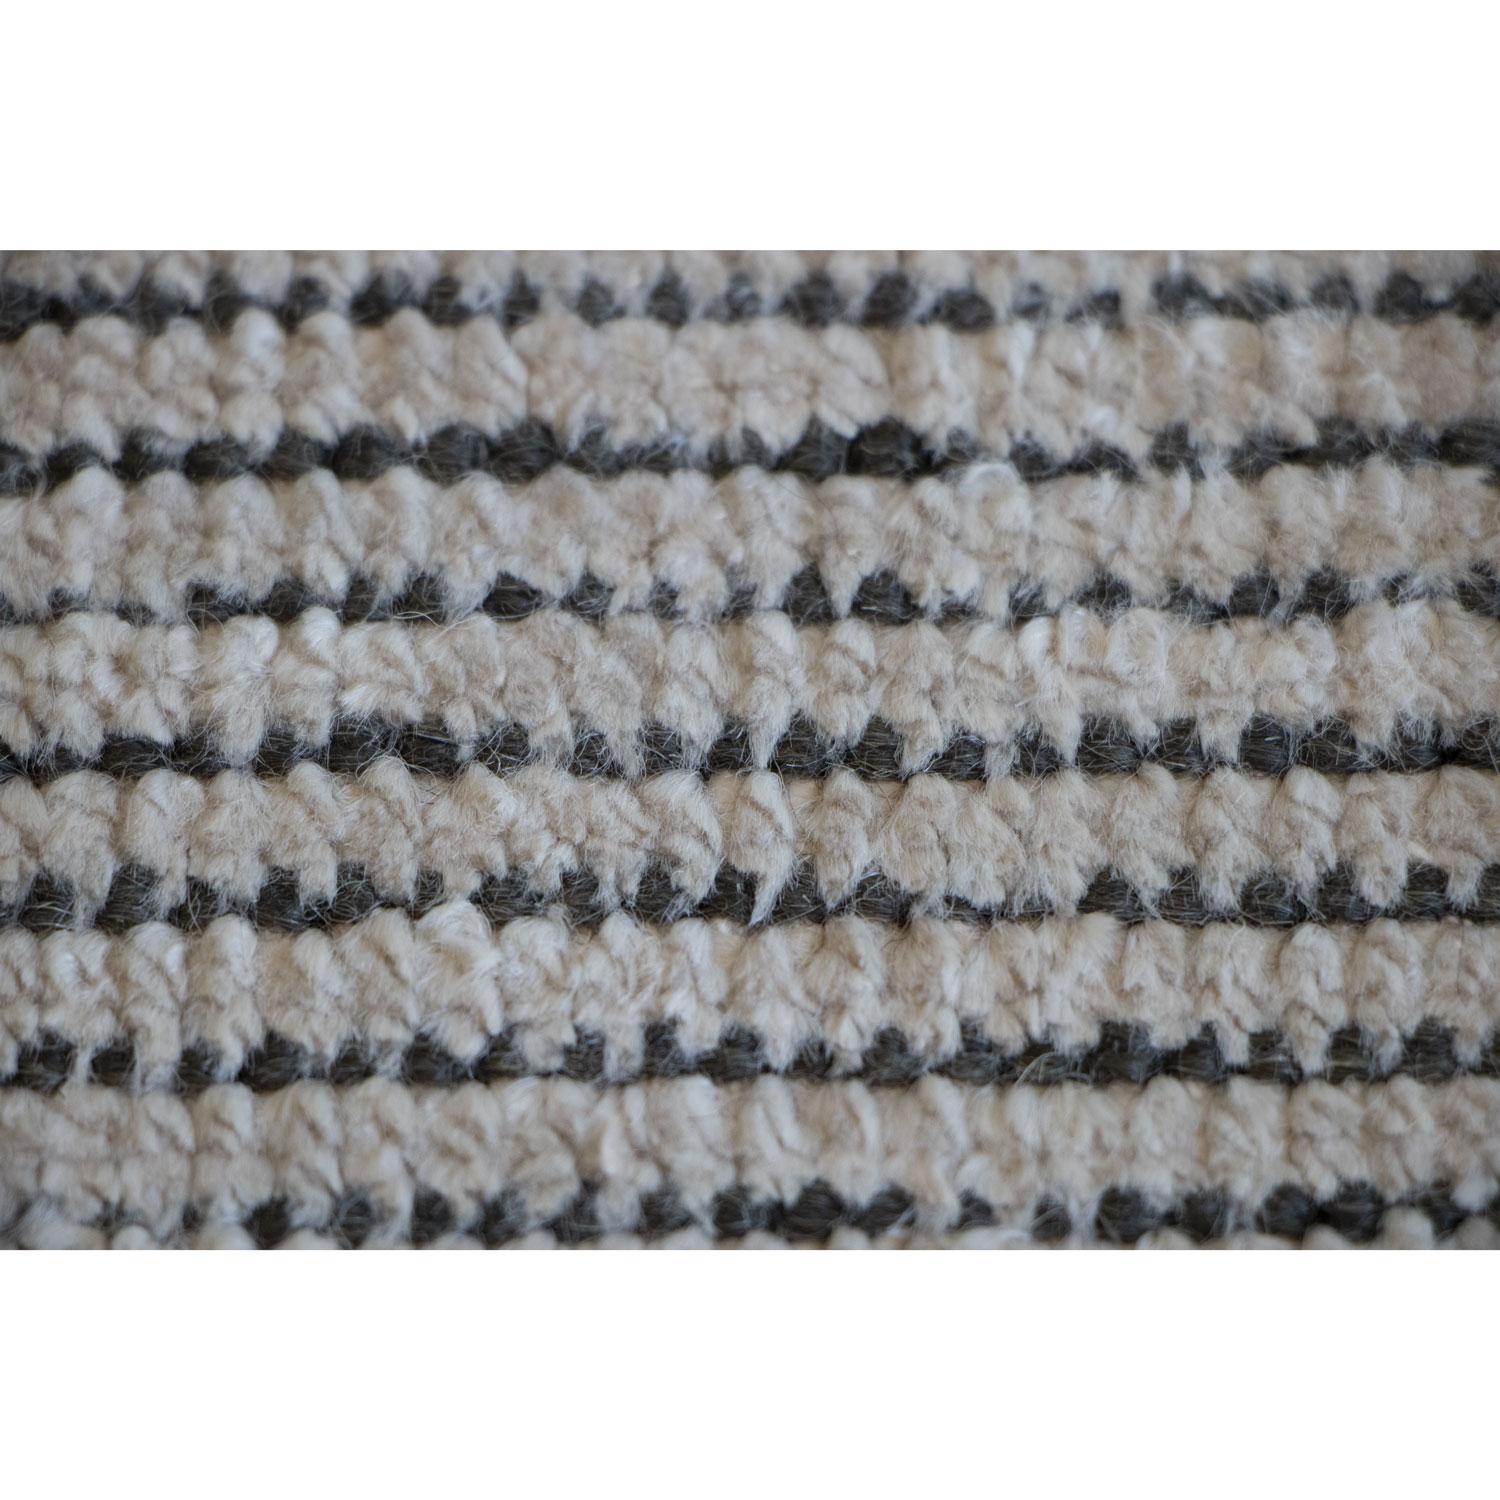 Hand-Woven 21st Cent Eco-Friendly Velvety White Rug by Deanna Comellini In Stock 200x300 cm For Sale